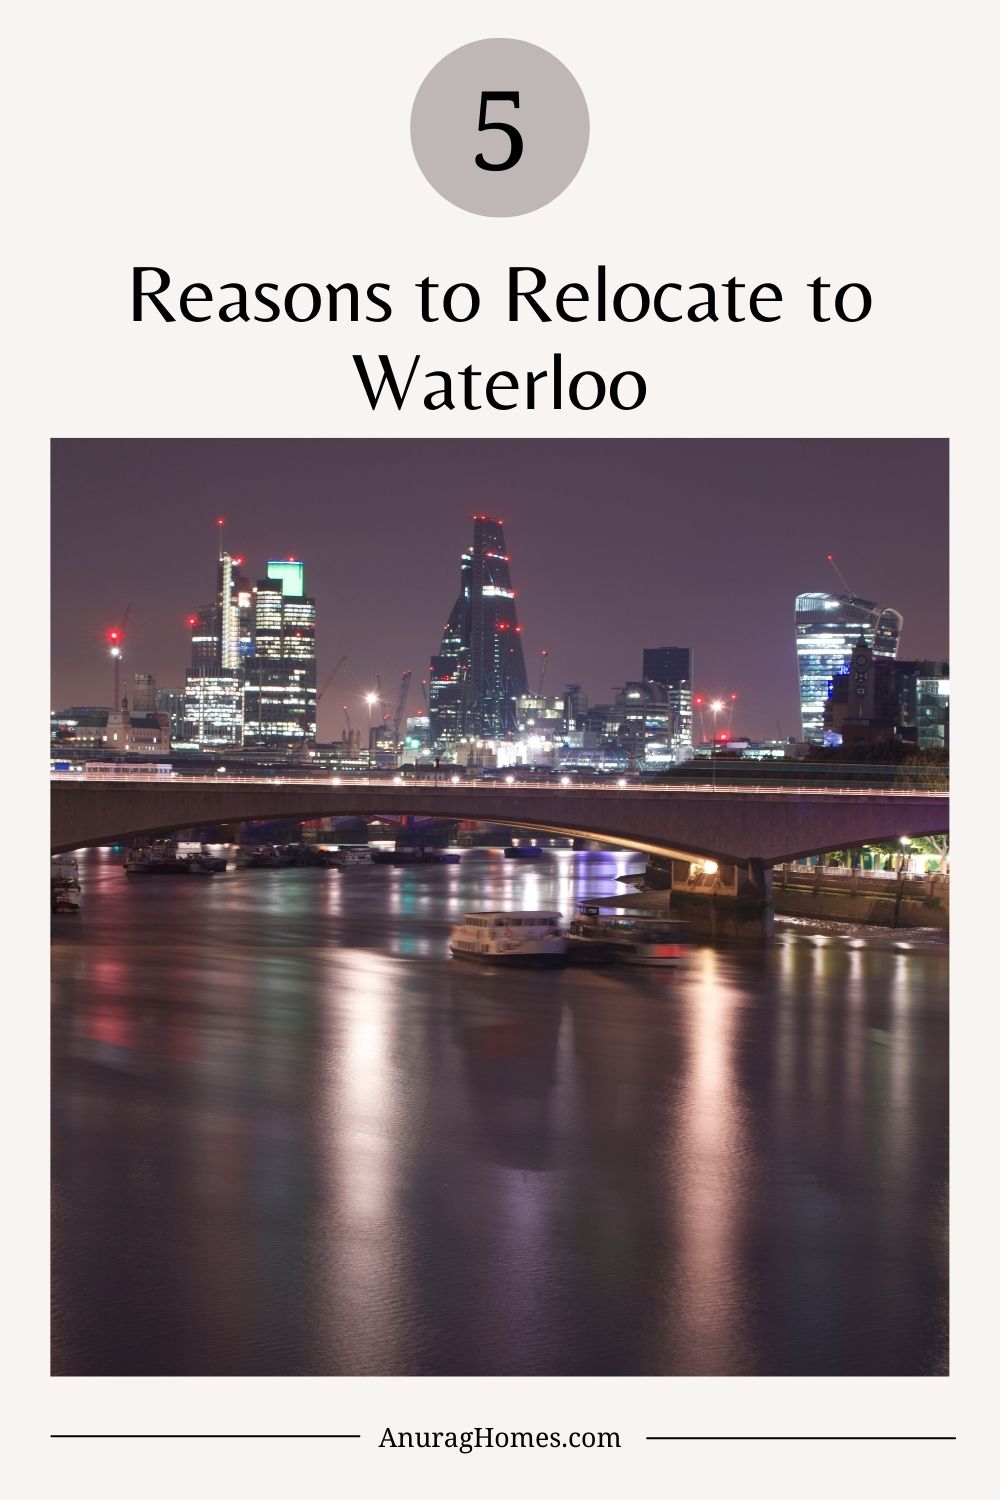 Reasons to Relocate to Waterloo